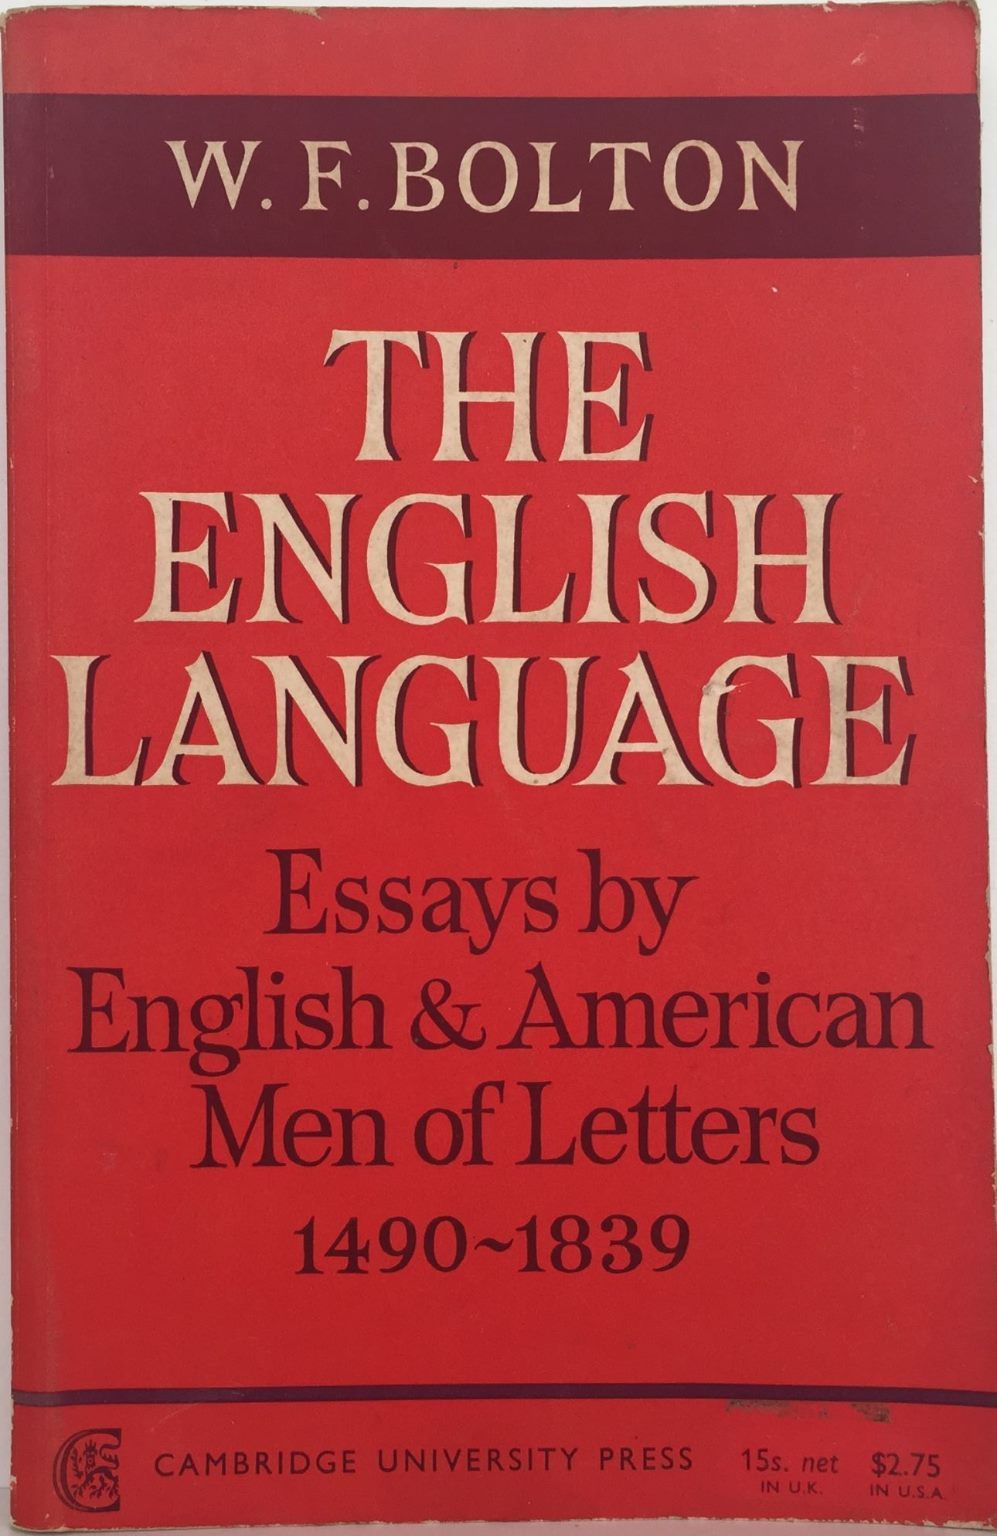 THE ENGLISH LANGUAGE: Essays By English & American Men of Letters 1490-1839